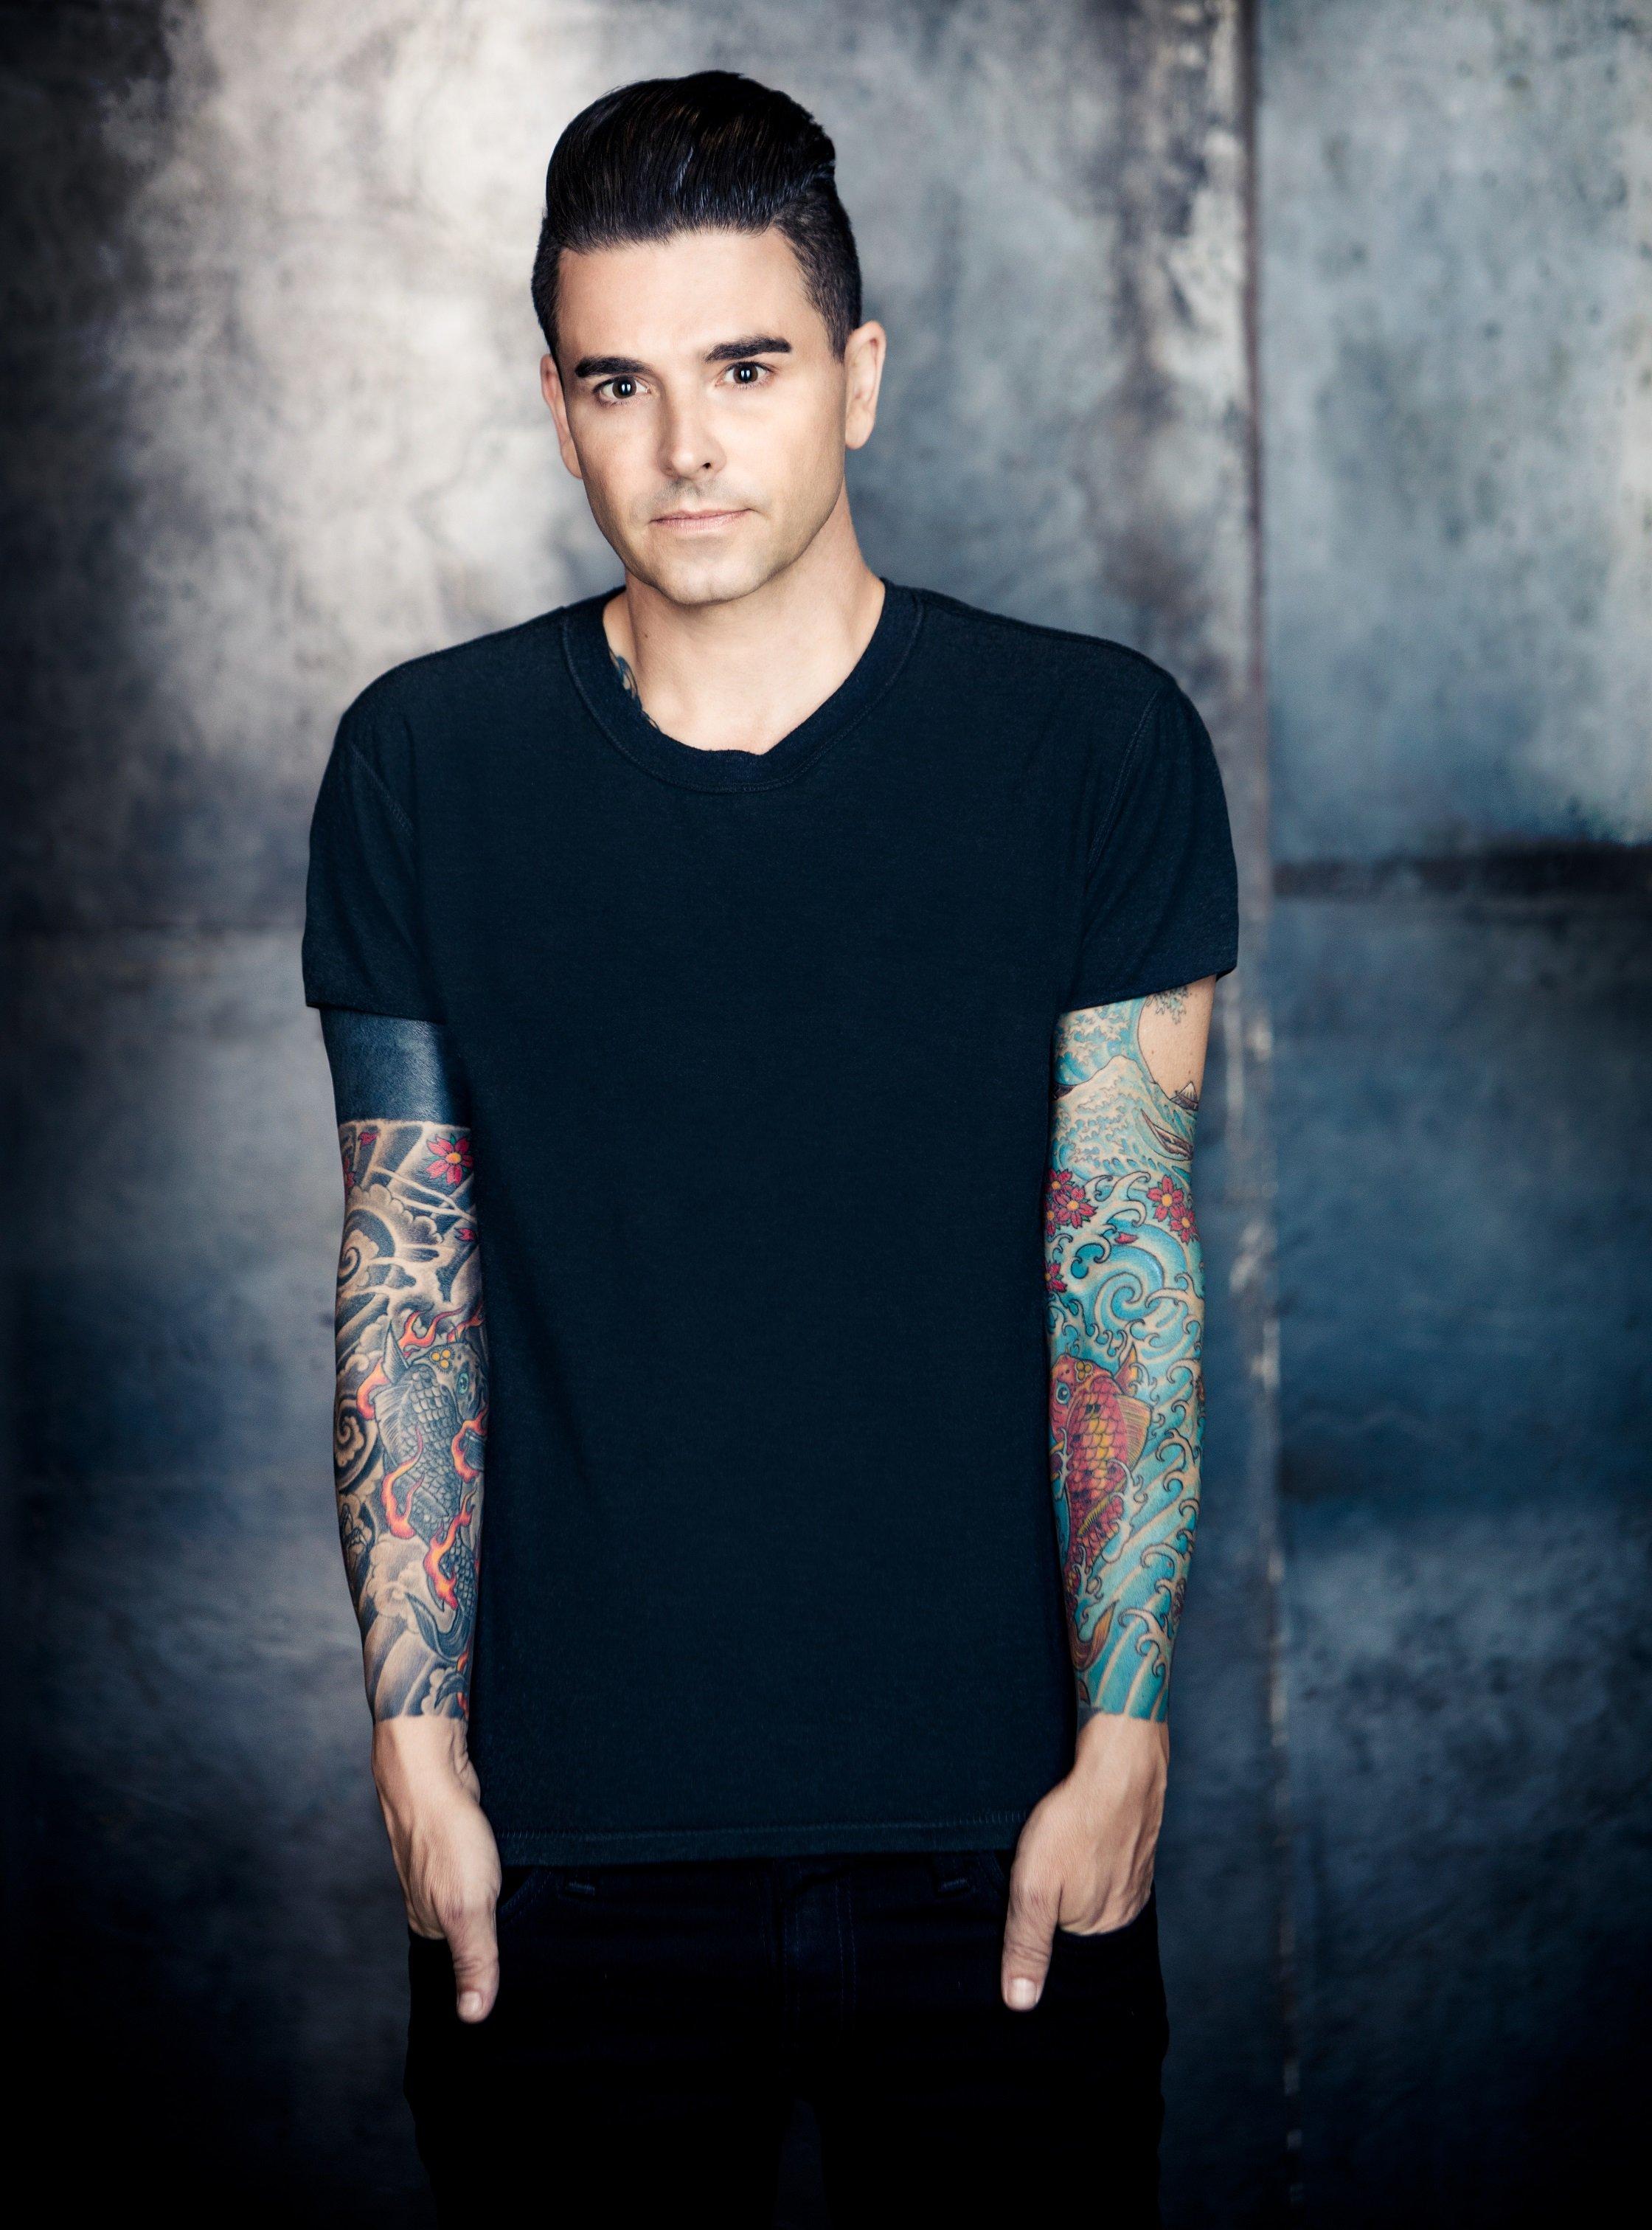 Dashboard Confessional's Chris Carrabba